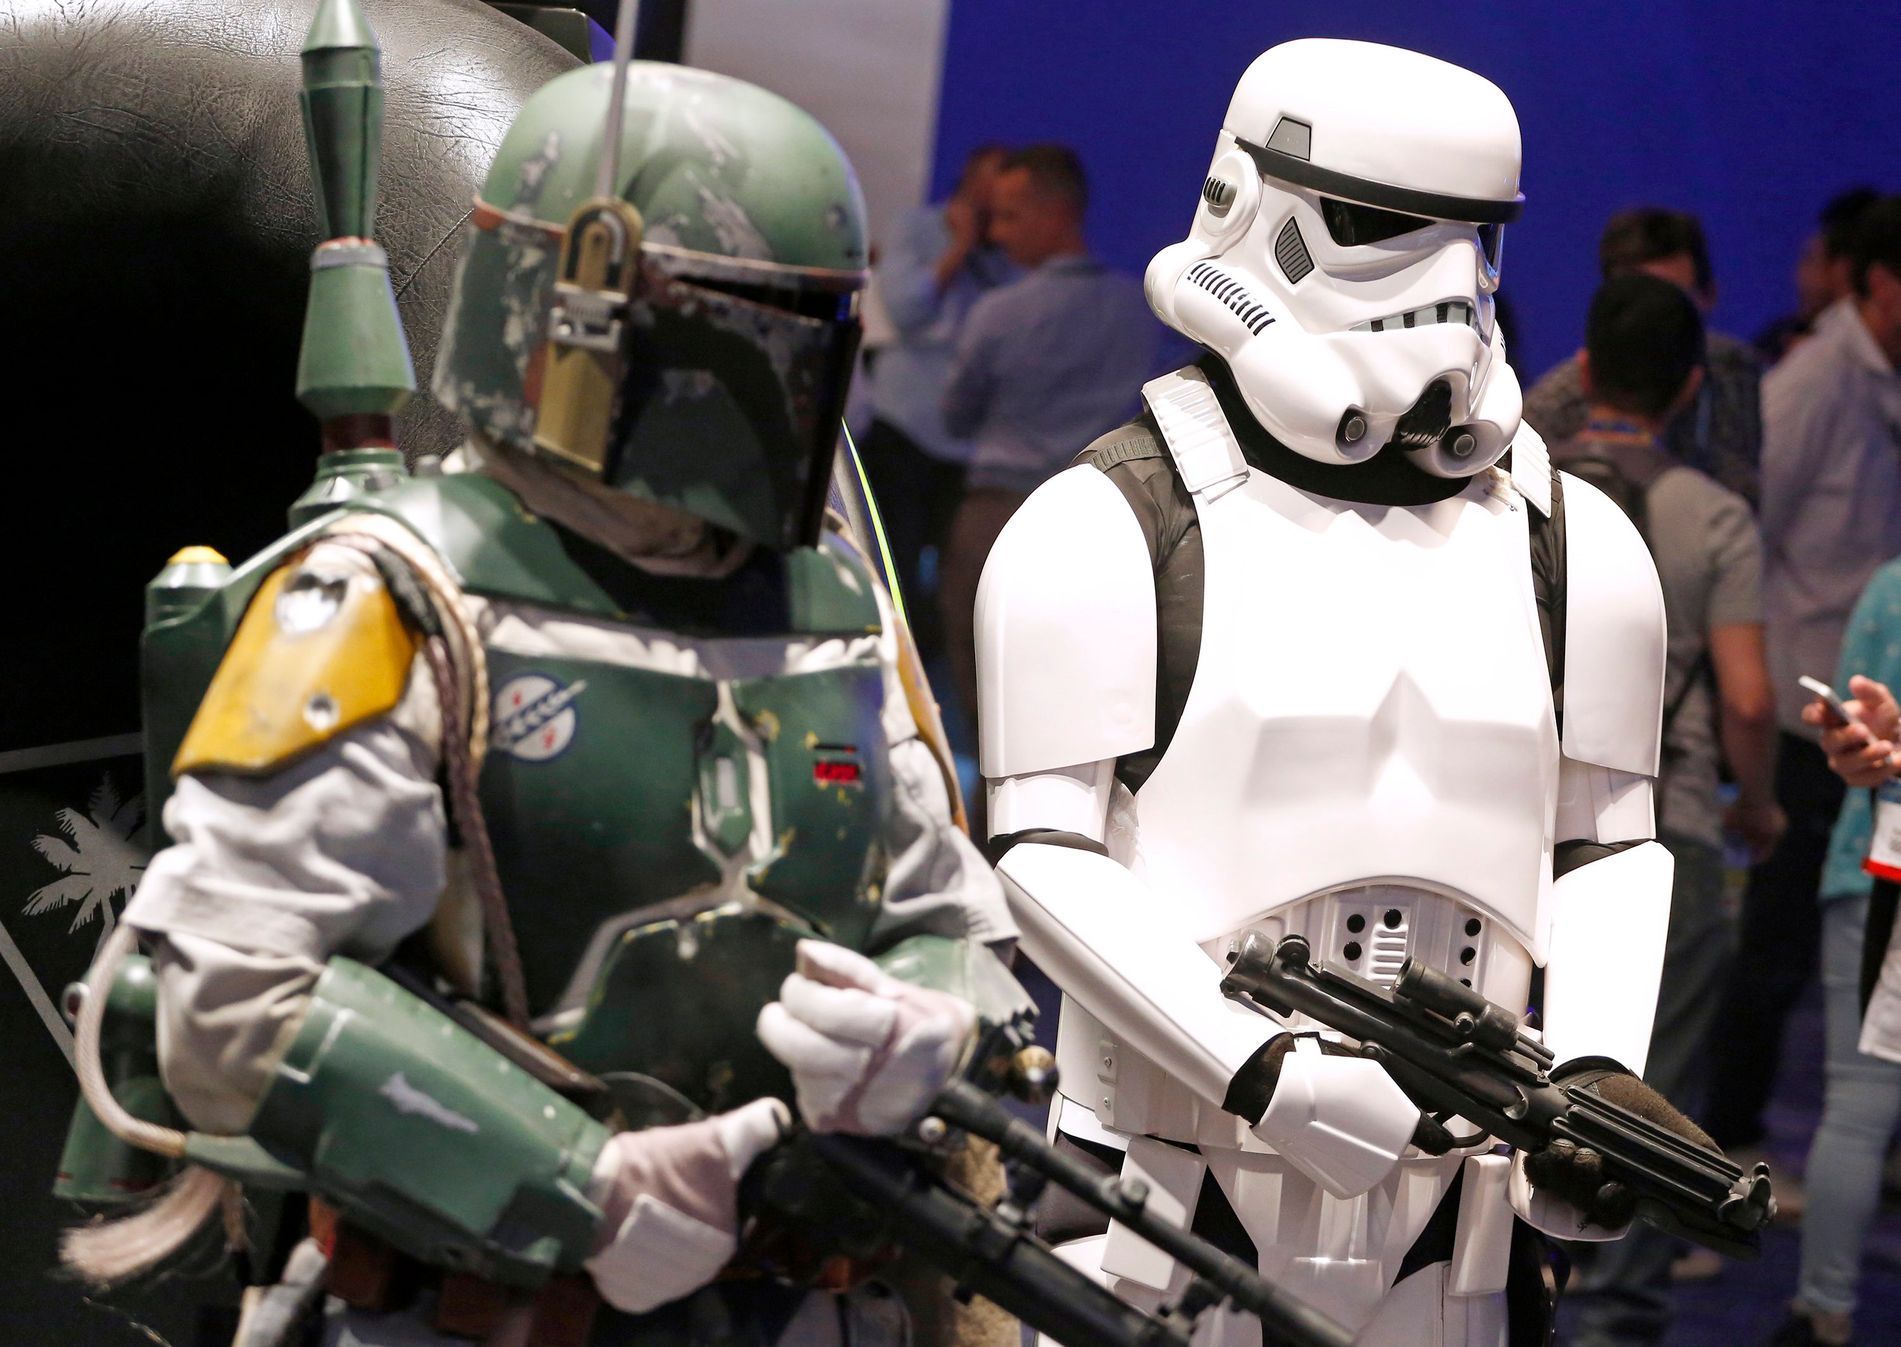 People dressed as &quot;Star Wars&quot; characters Boba Fett (L) and a Stormtrooper pose at the 2014 Electronic Entertainment Expo, known as E3, in Los Angeles